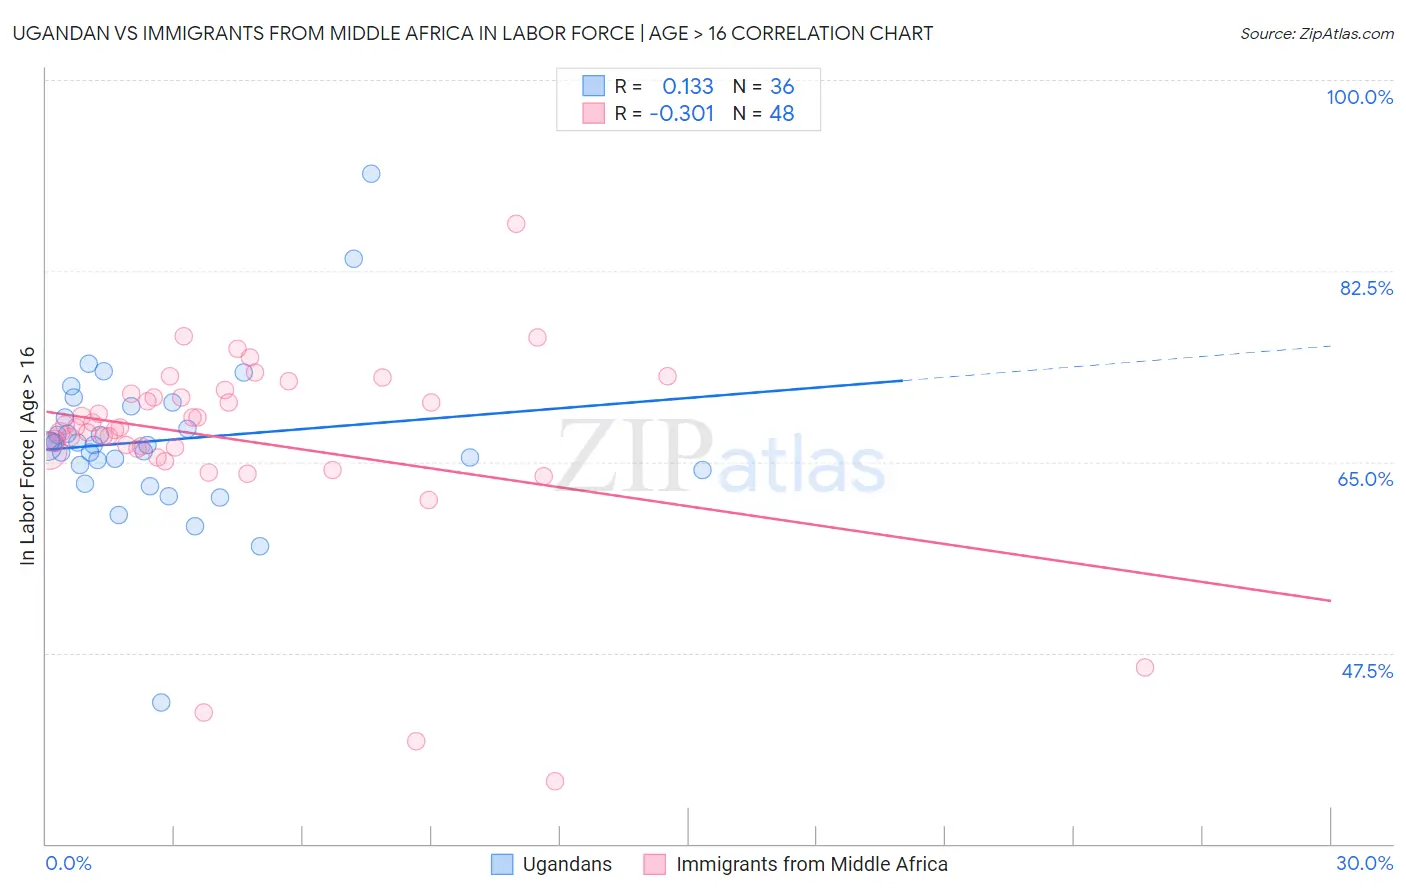 Ugandan vs Immigrants from Middle Africa In Labor Force | Age > 16